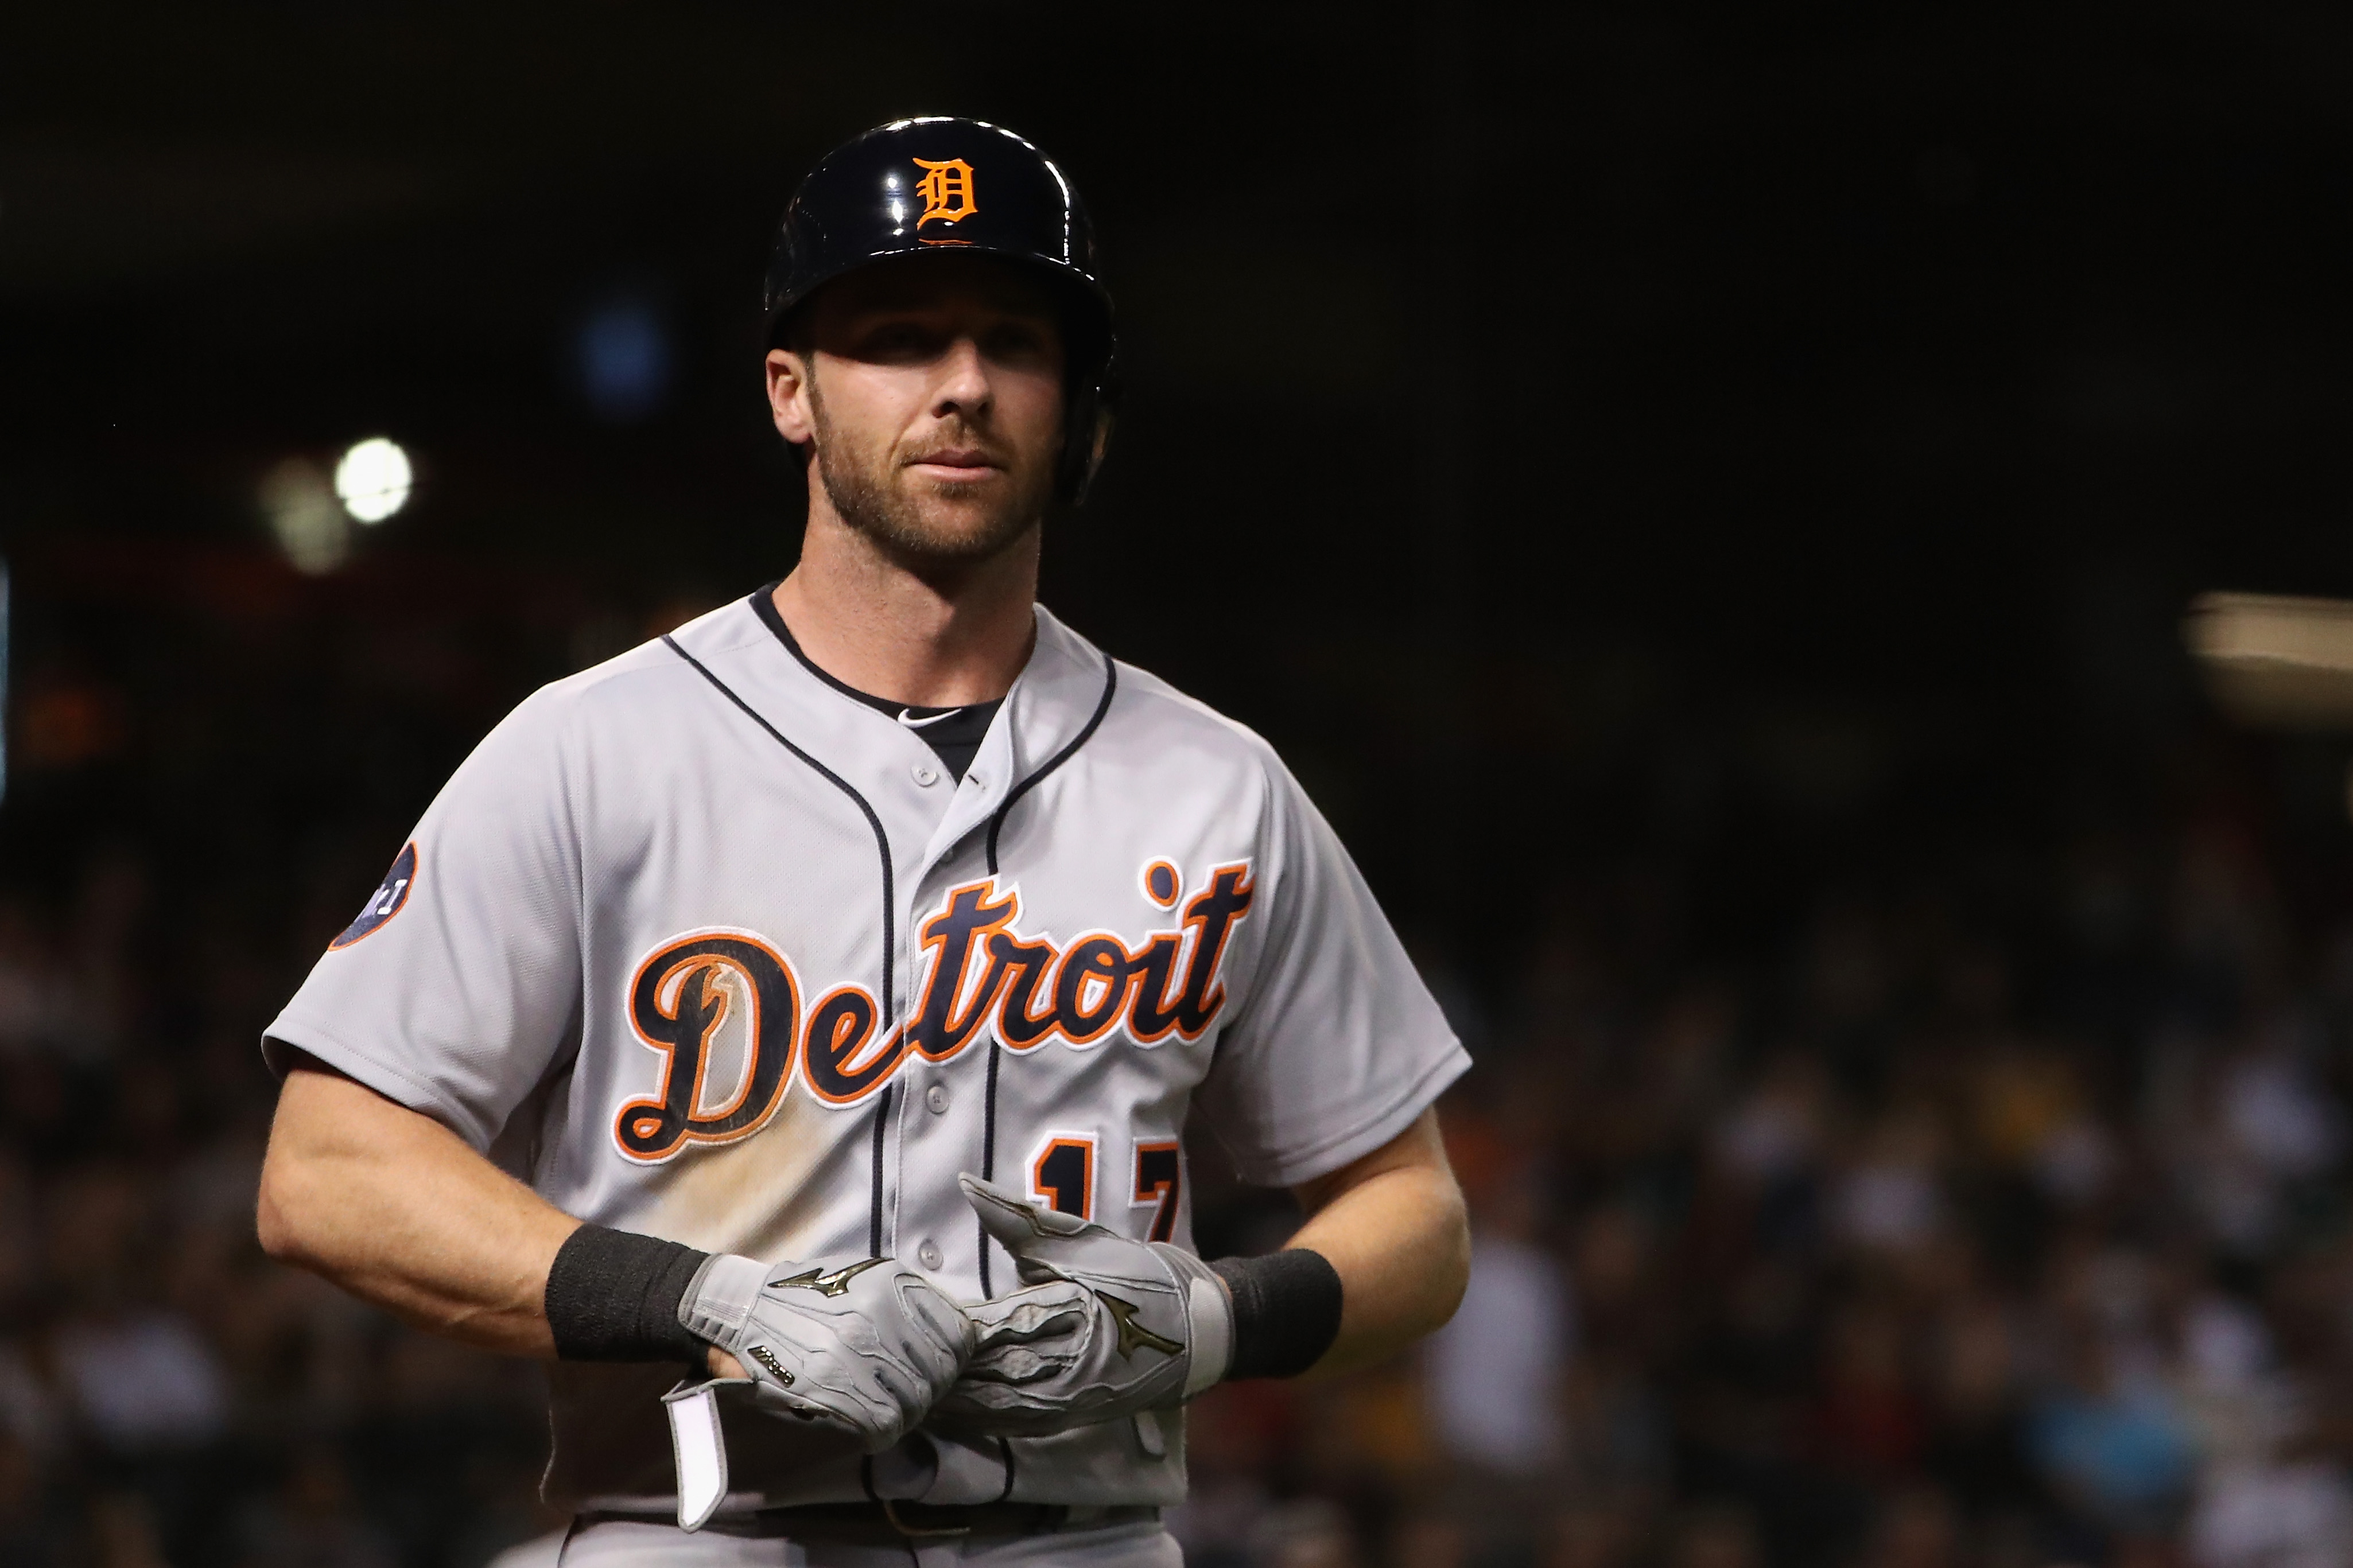 2017 Tigers player preview: Is Andrew Romine a legitimate option